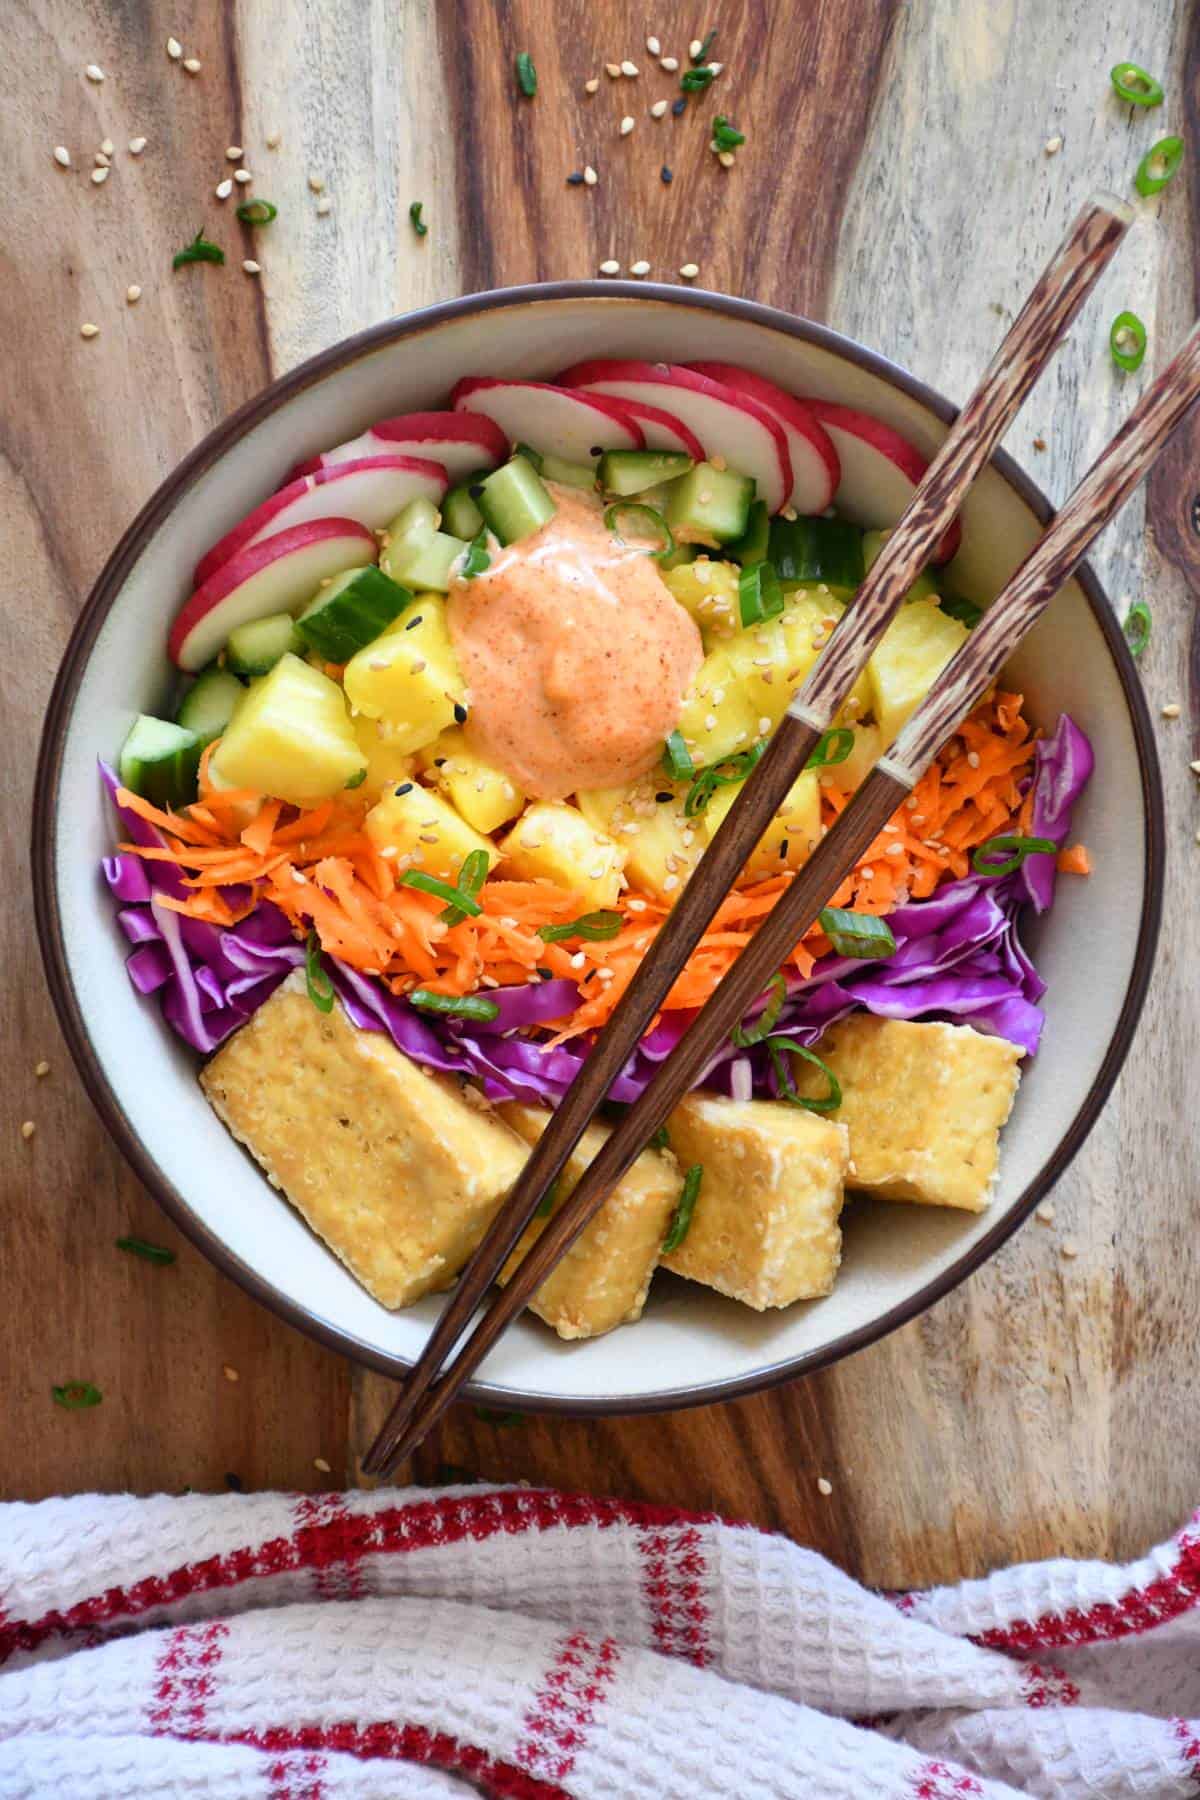 Vegetarian poke bowl made with fresh vegetables, brown rice, baked tofu and paprika sauce.